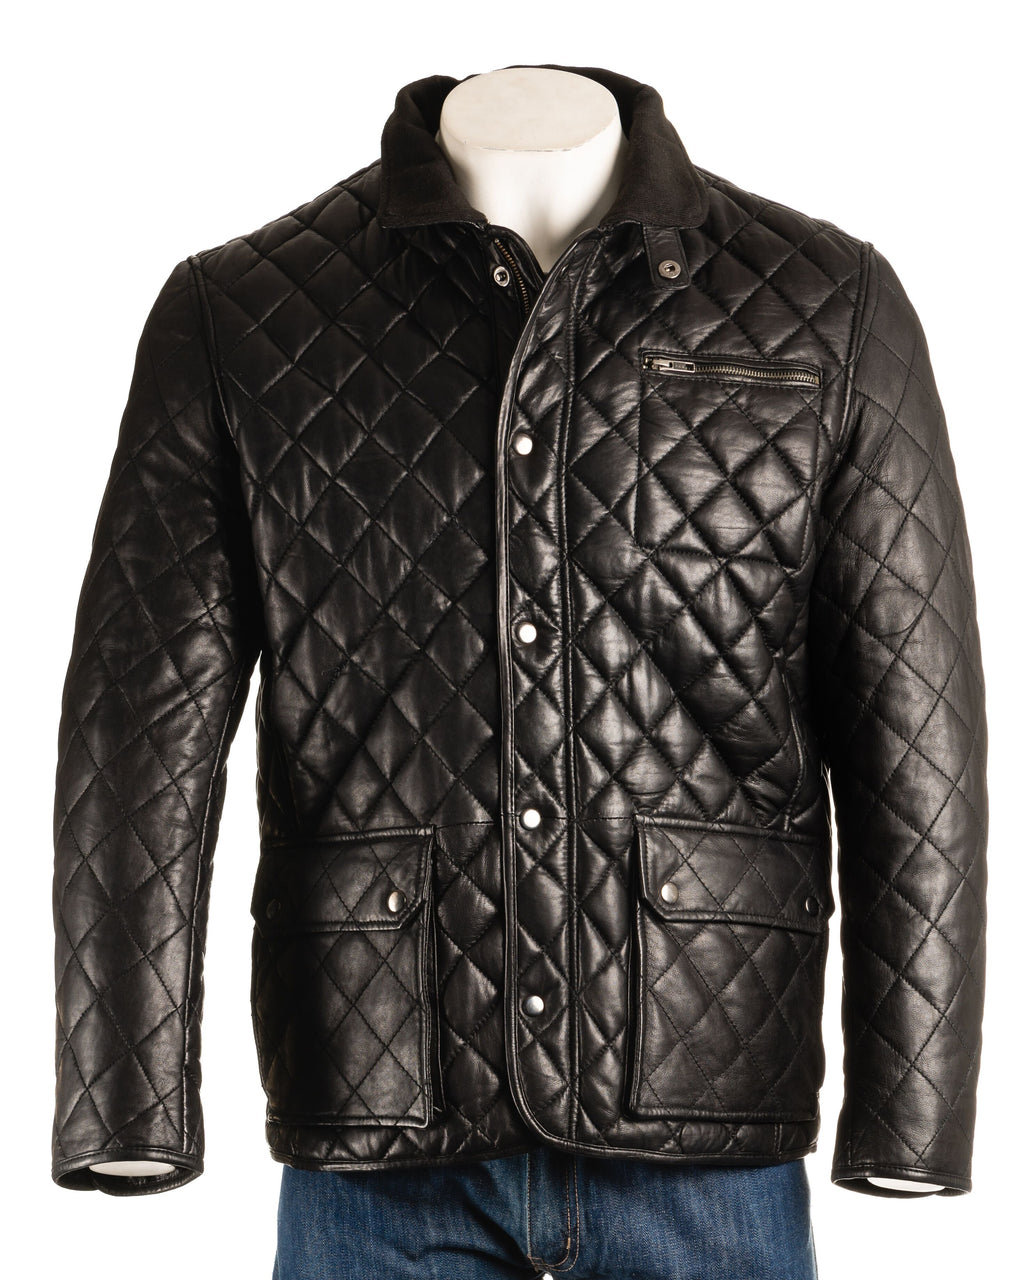 Men's Black Quilted Leather Coat with Diamond Stitch - Javier